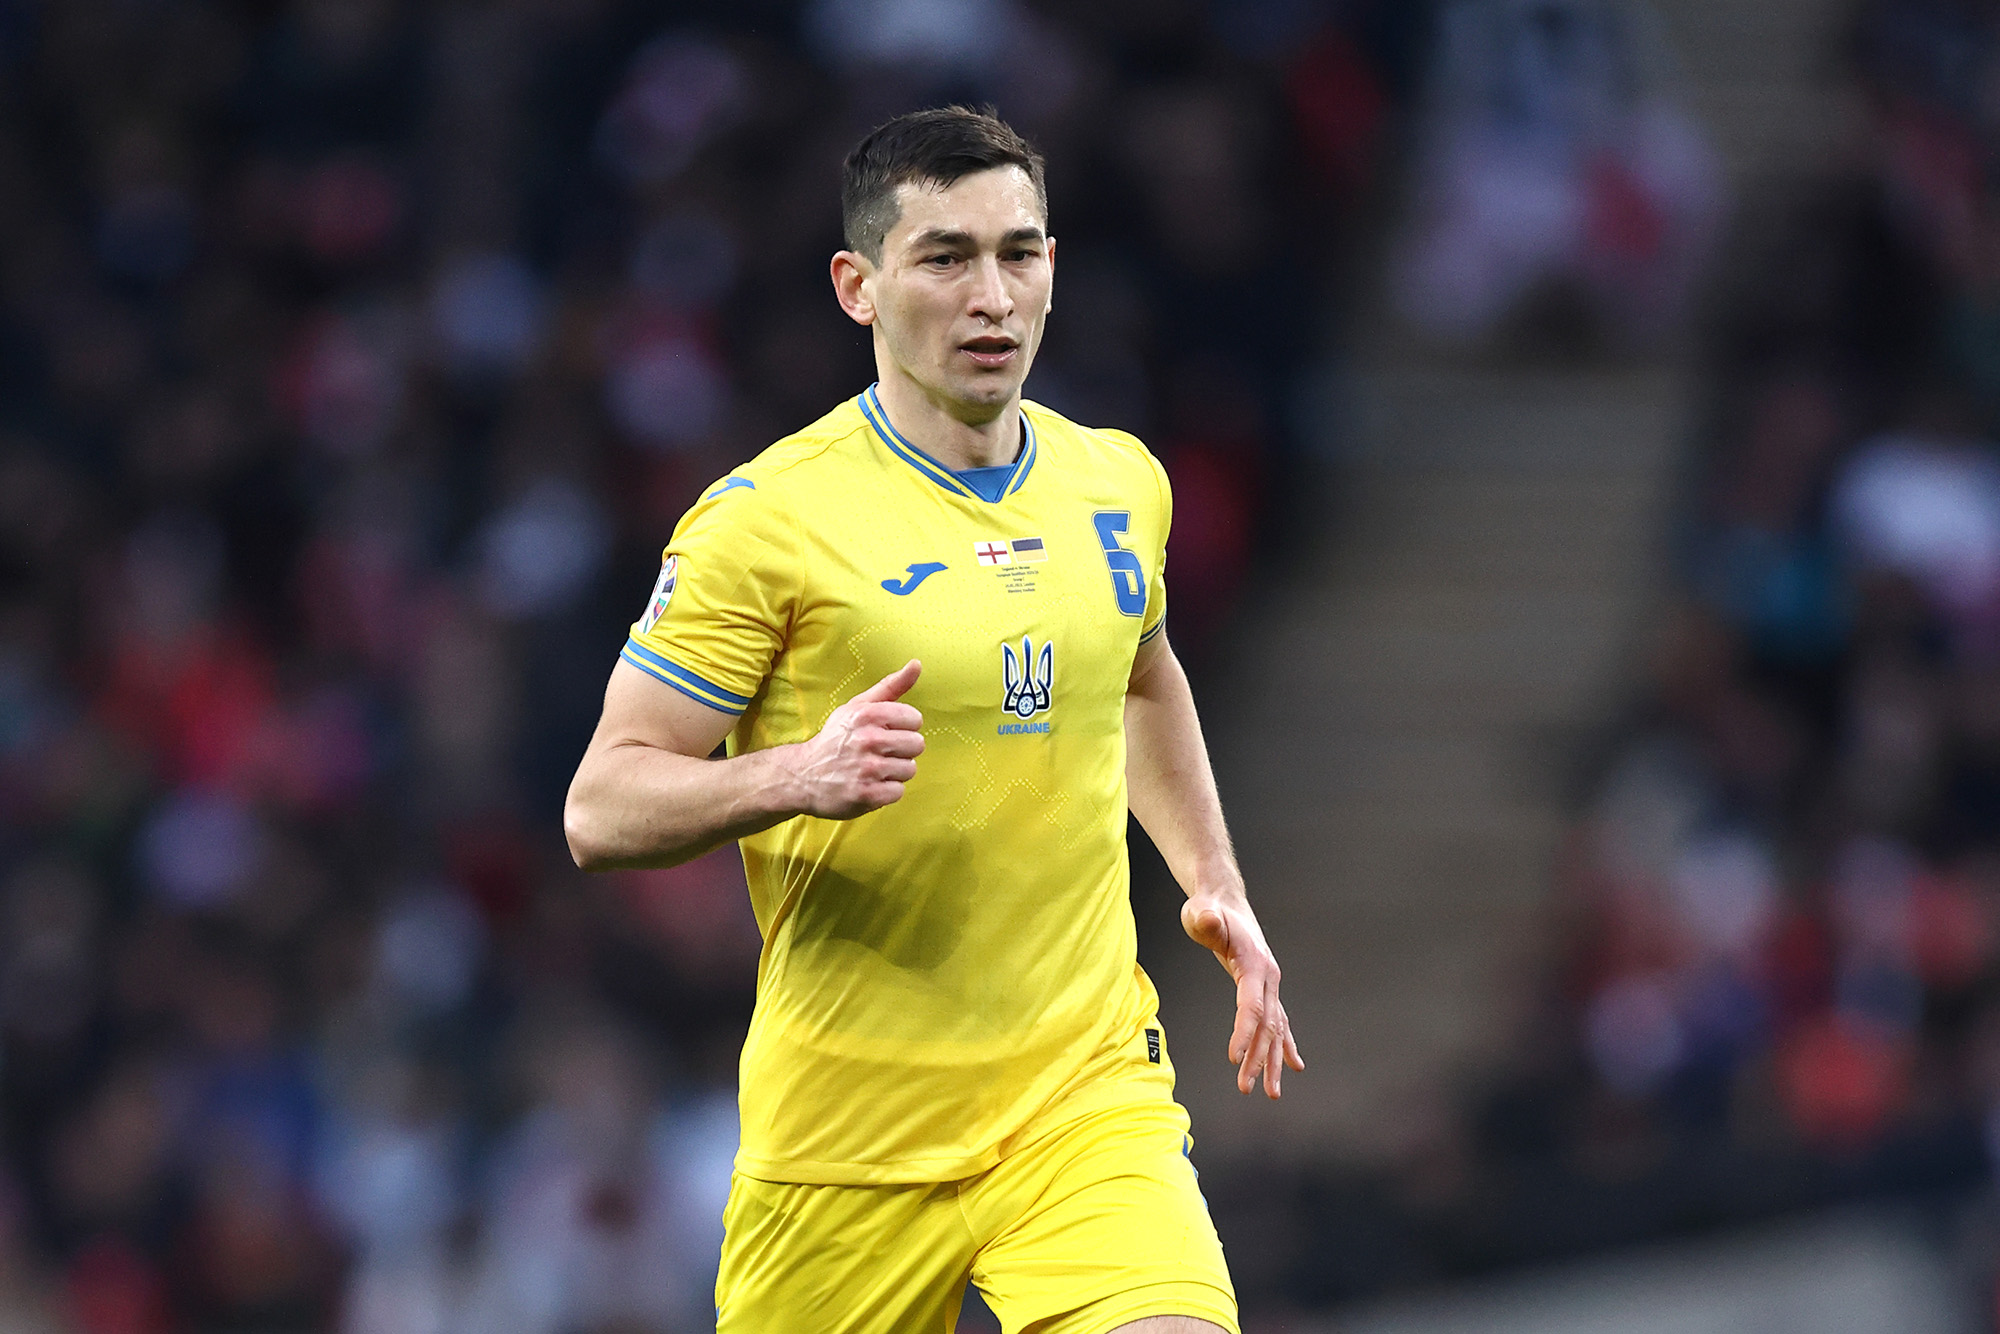 Taras Stepanenko of Ukraine during the UEFA EURO 2024 qualifying round group C match between England and Ukraine at Wembley Arena on March 26, in London, England.